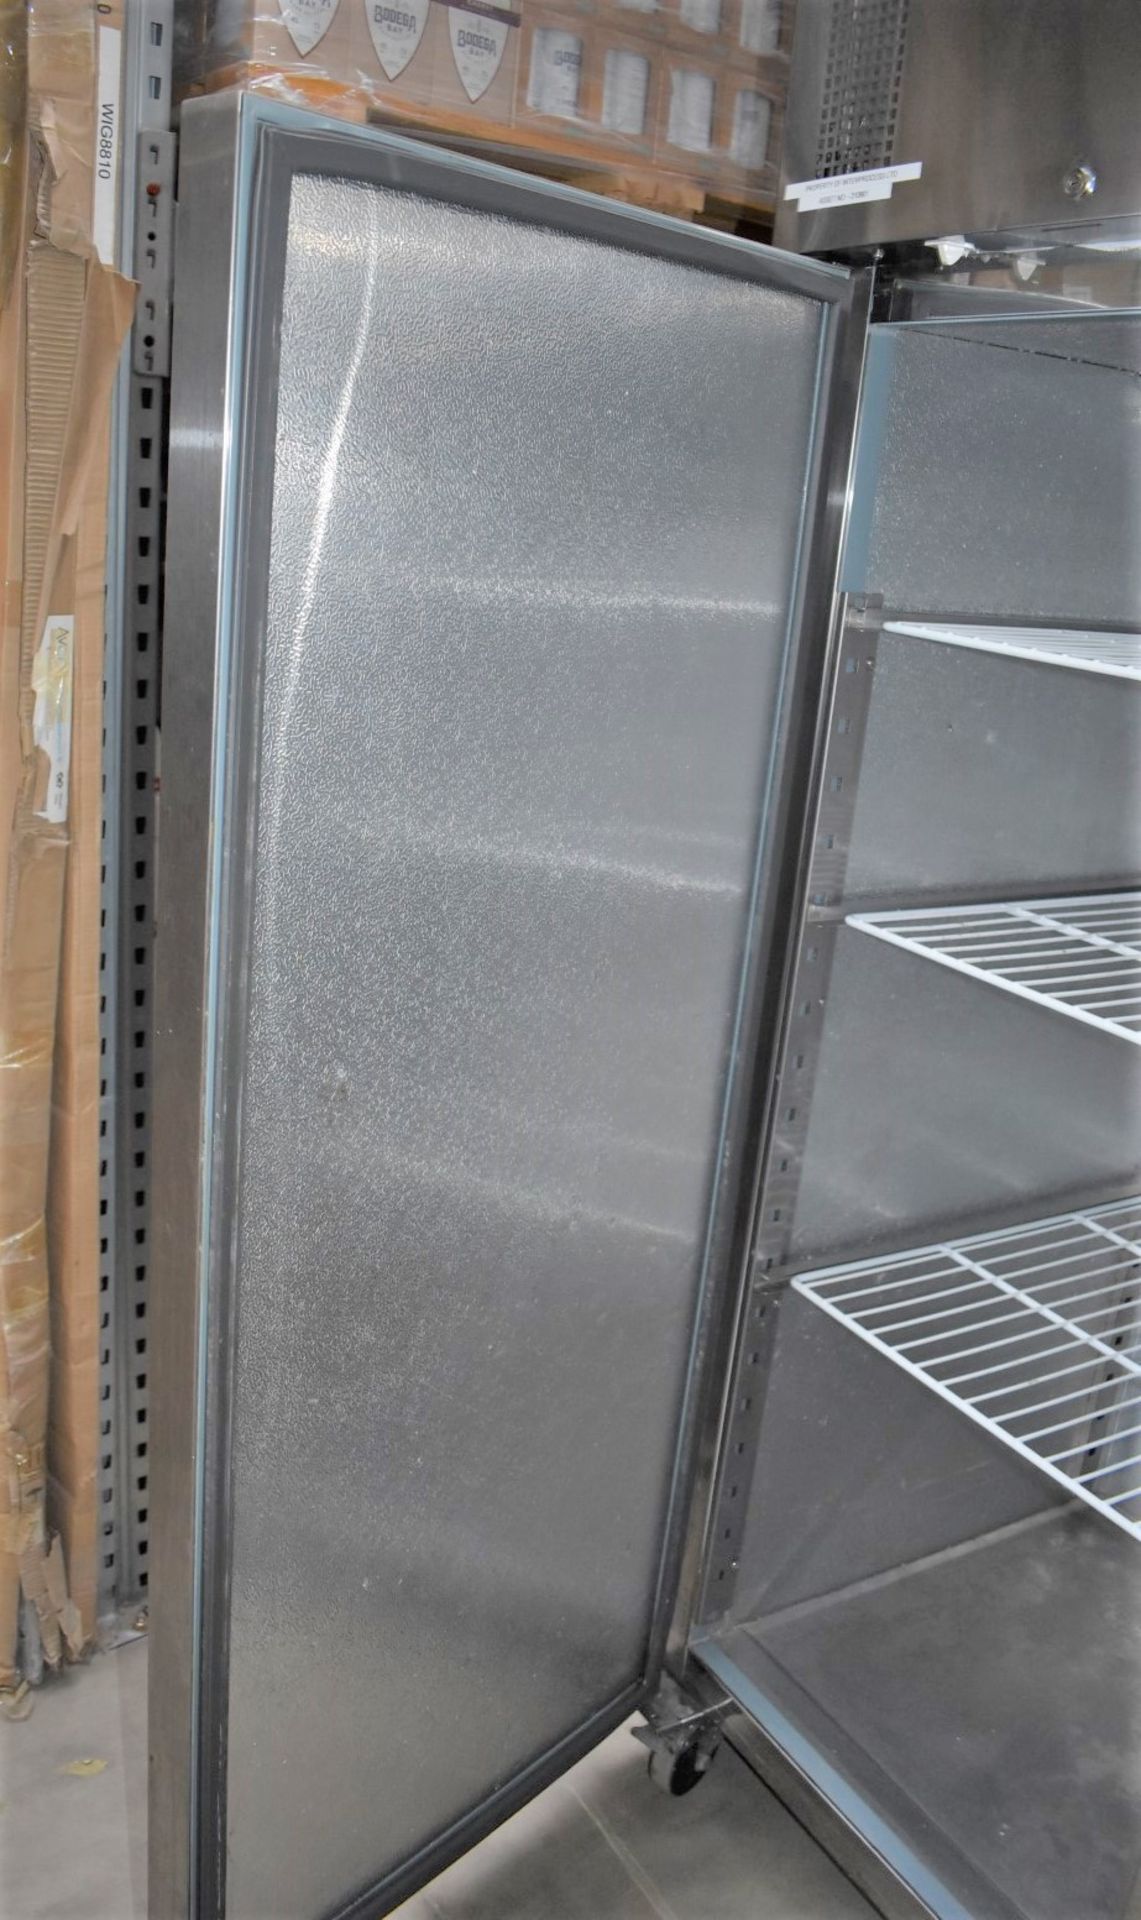 1 x Polar G Series Upright Double Door Refrigerator - Model G594 - Complete With Internal - Image 4 of 18